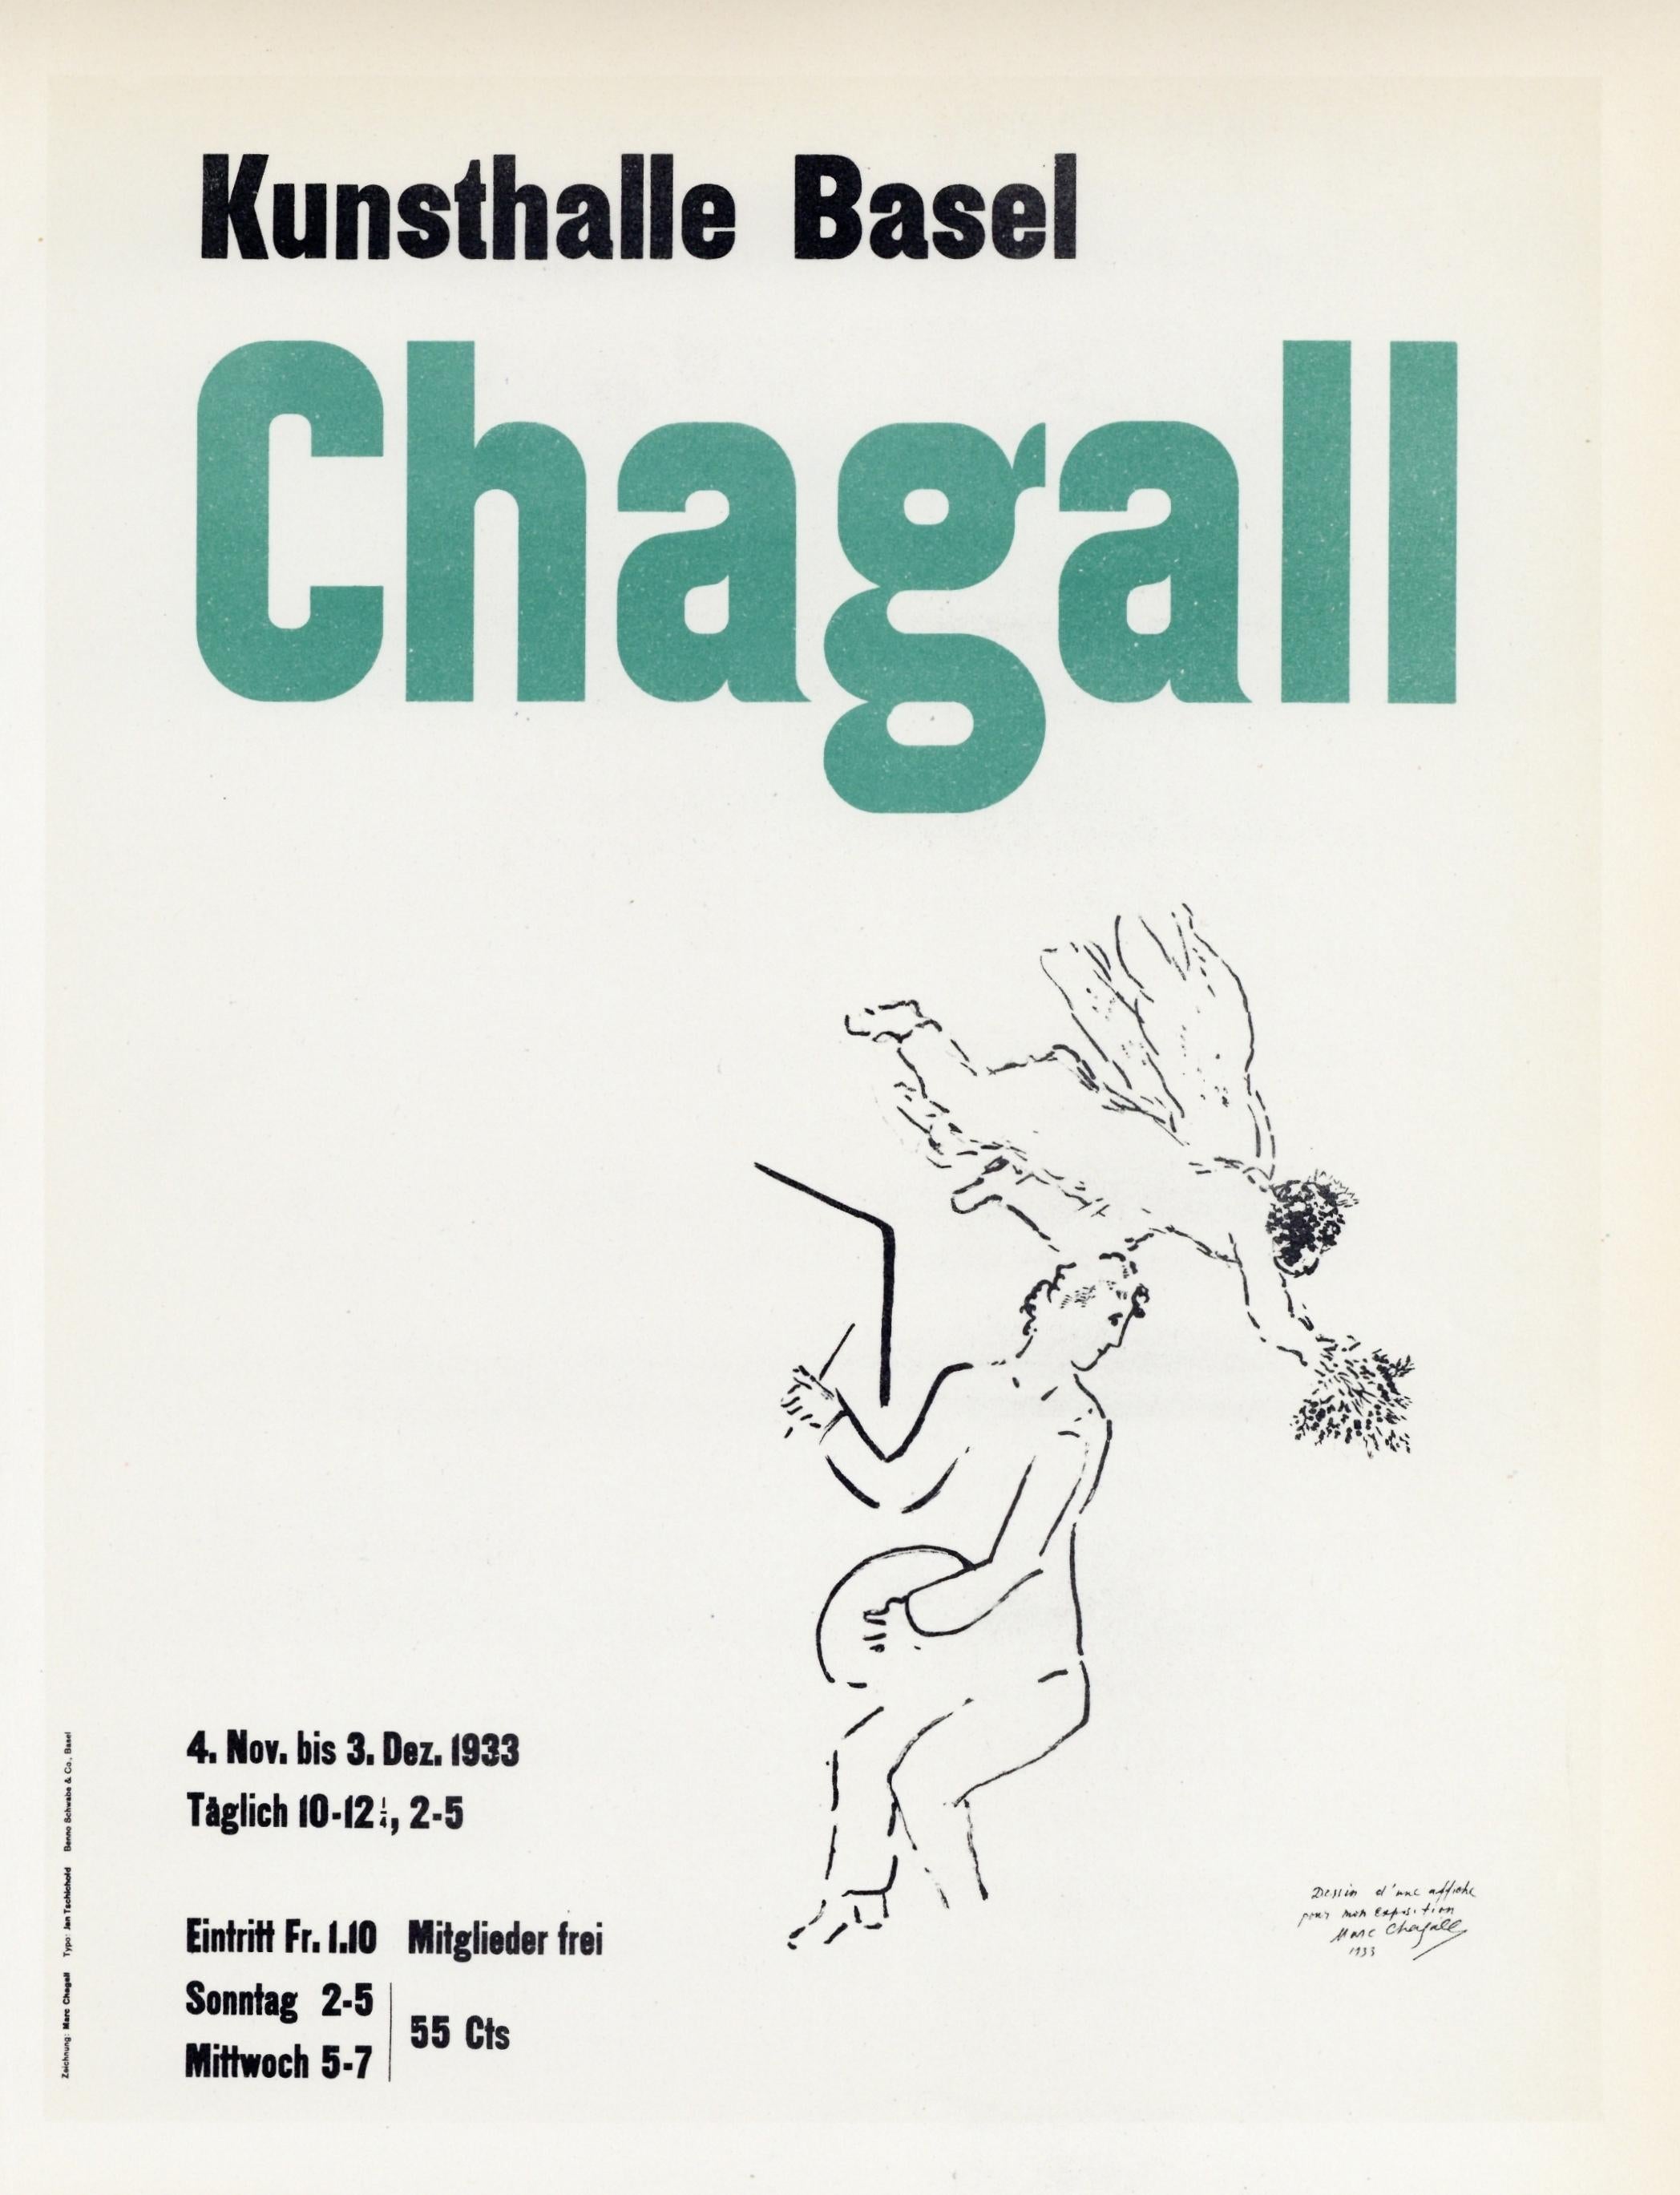 "Kunsthalle Basel" lithograph poster - Print by (after) Marc Chagall